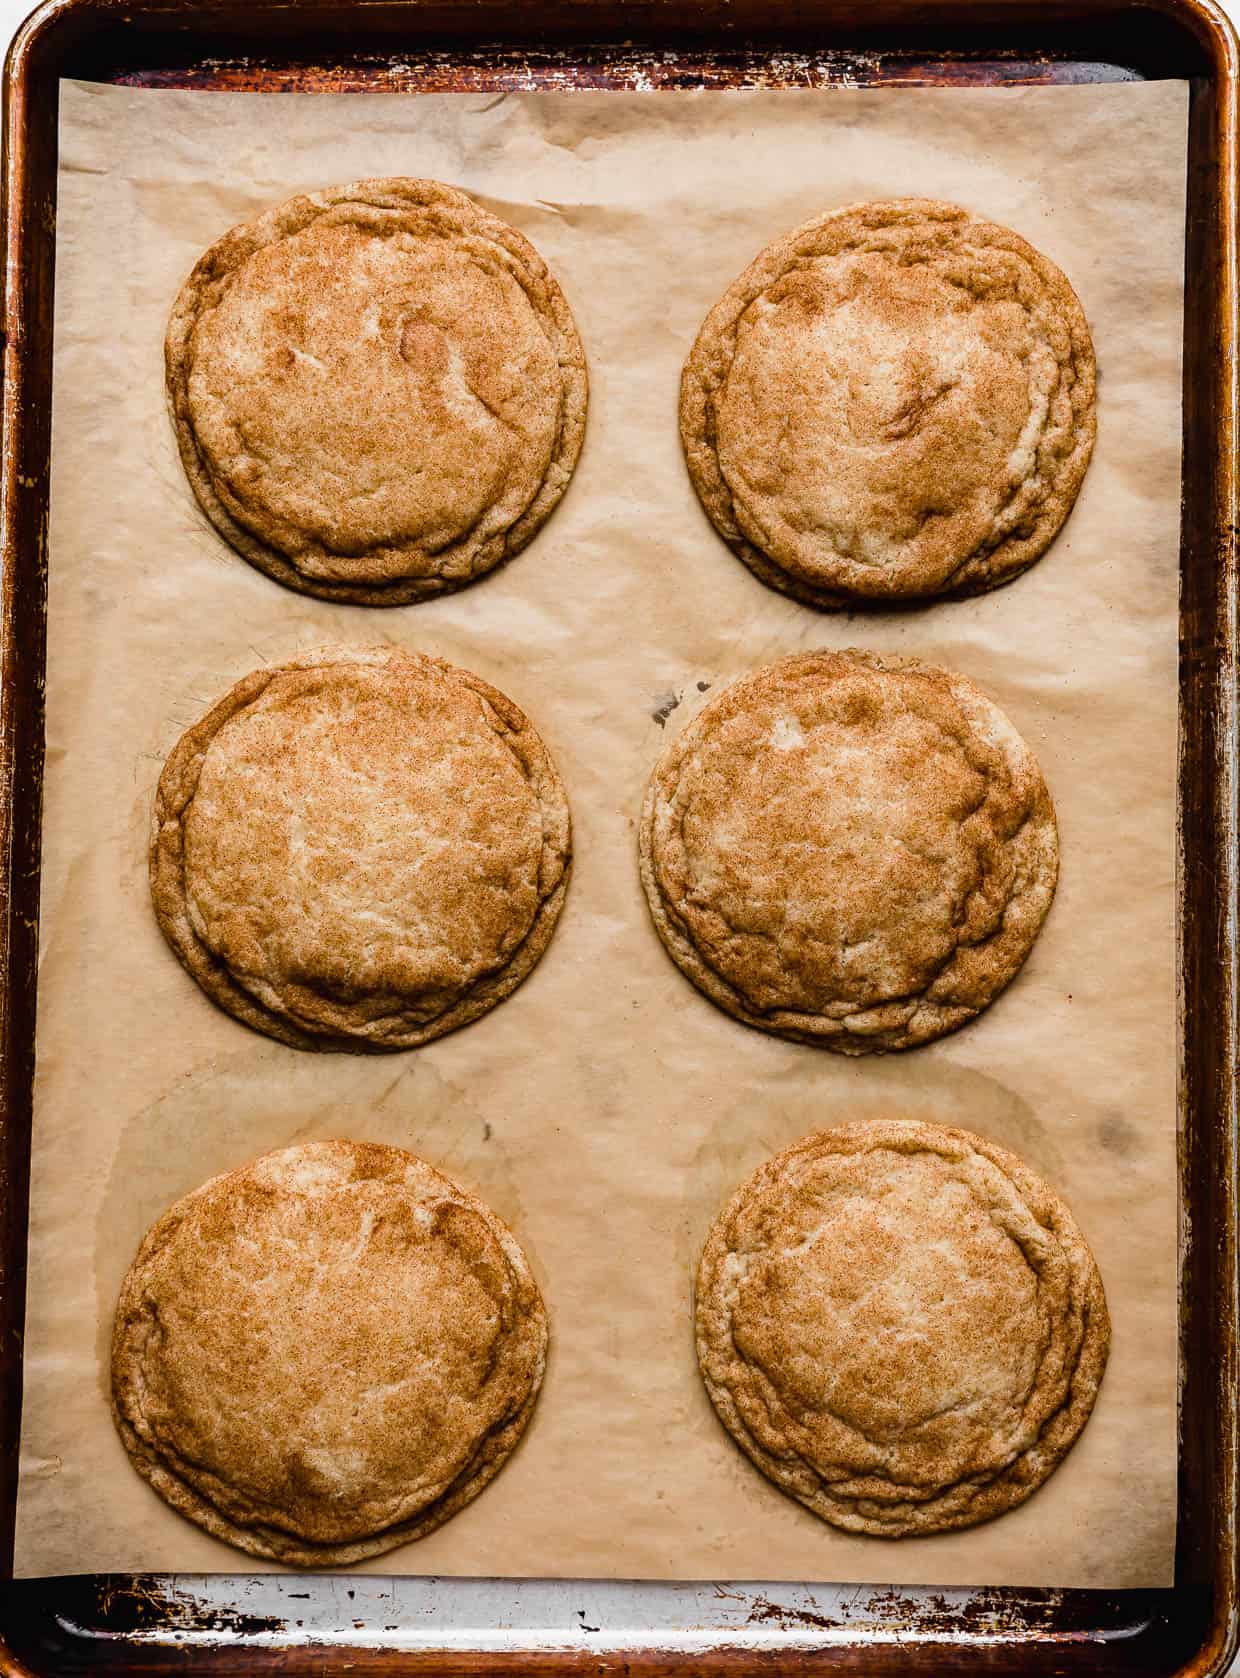 Six baked large snickerdoodle cookies on a baking sheet.